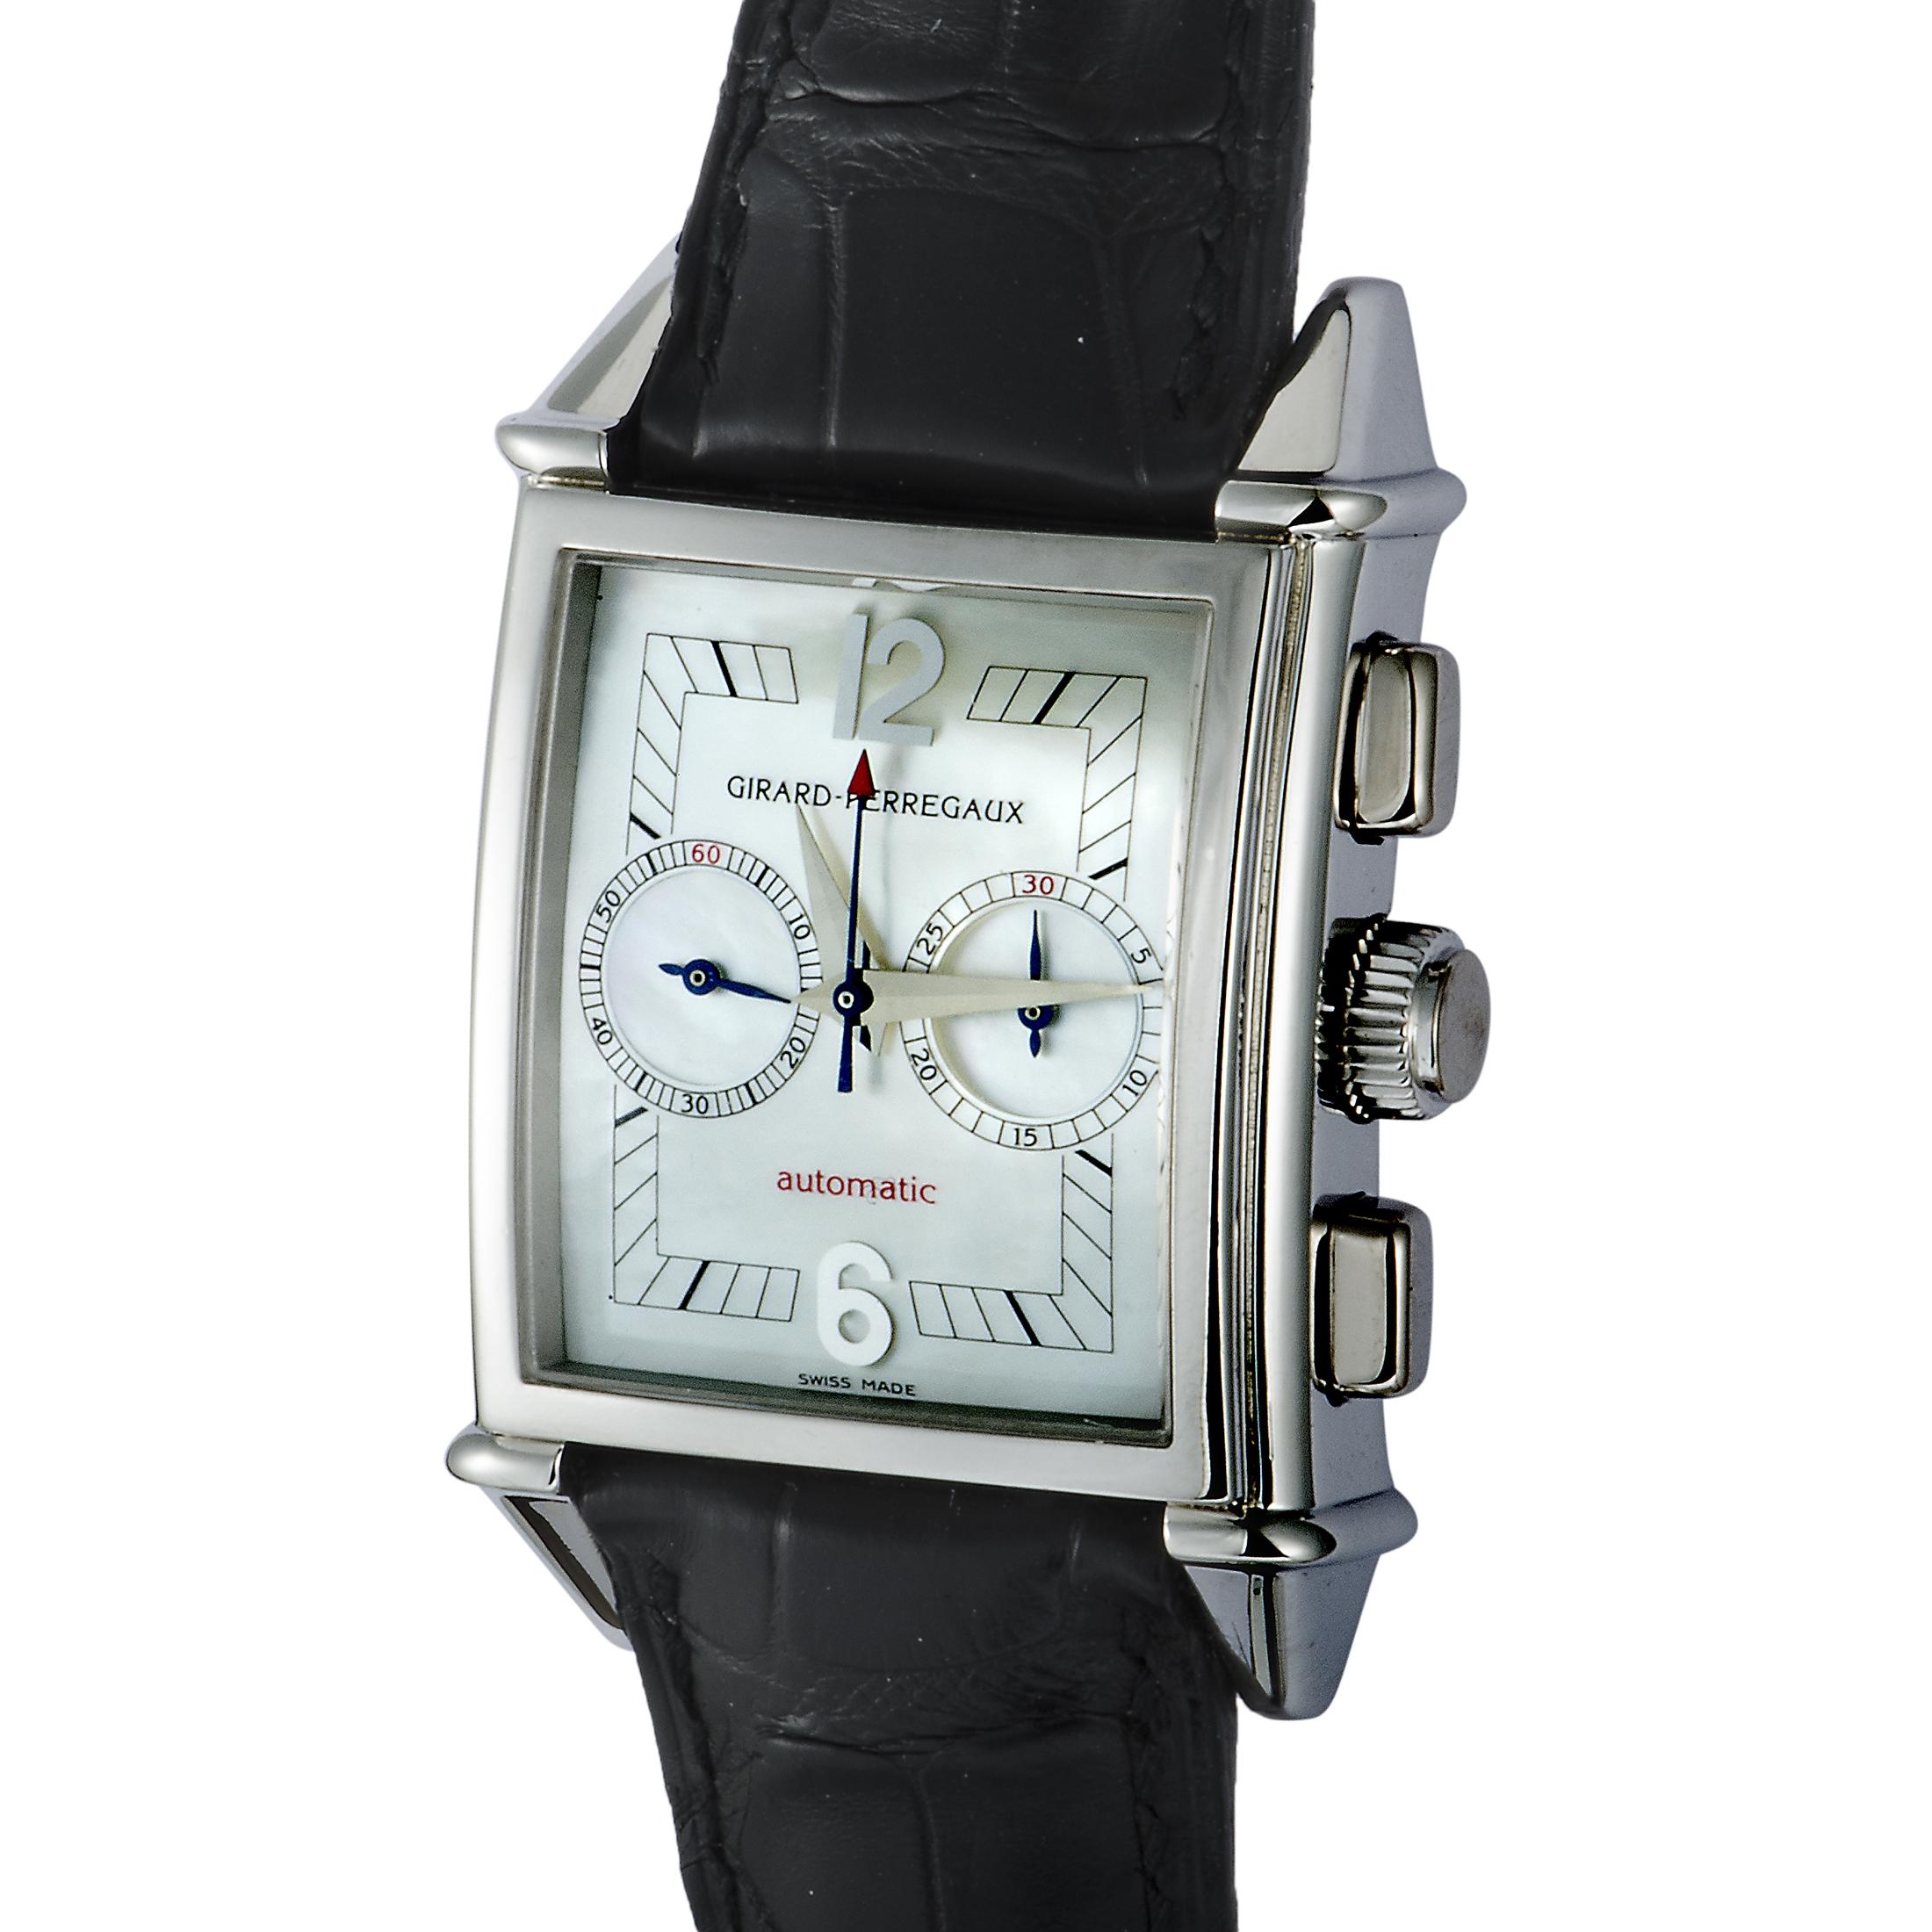 This splendid mint condition timepiece from Girard-Perregaux, circa 200's, offers an elaborate chronograph function presented on the beautiful white mother-of-pearl dial with blue makers and Arabic numerals. The watch is powered by a self-winding